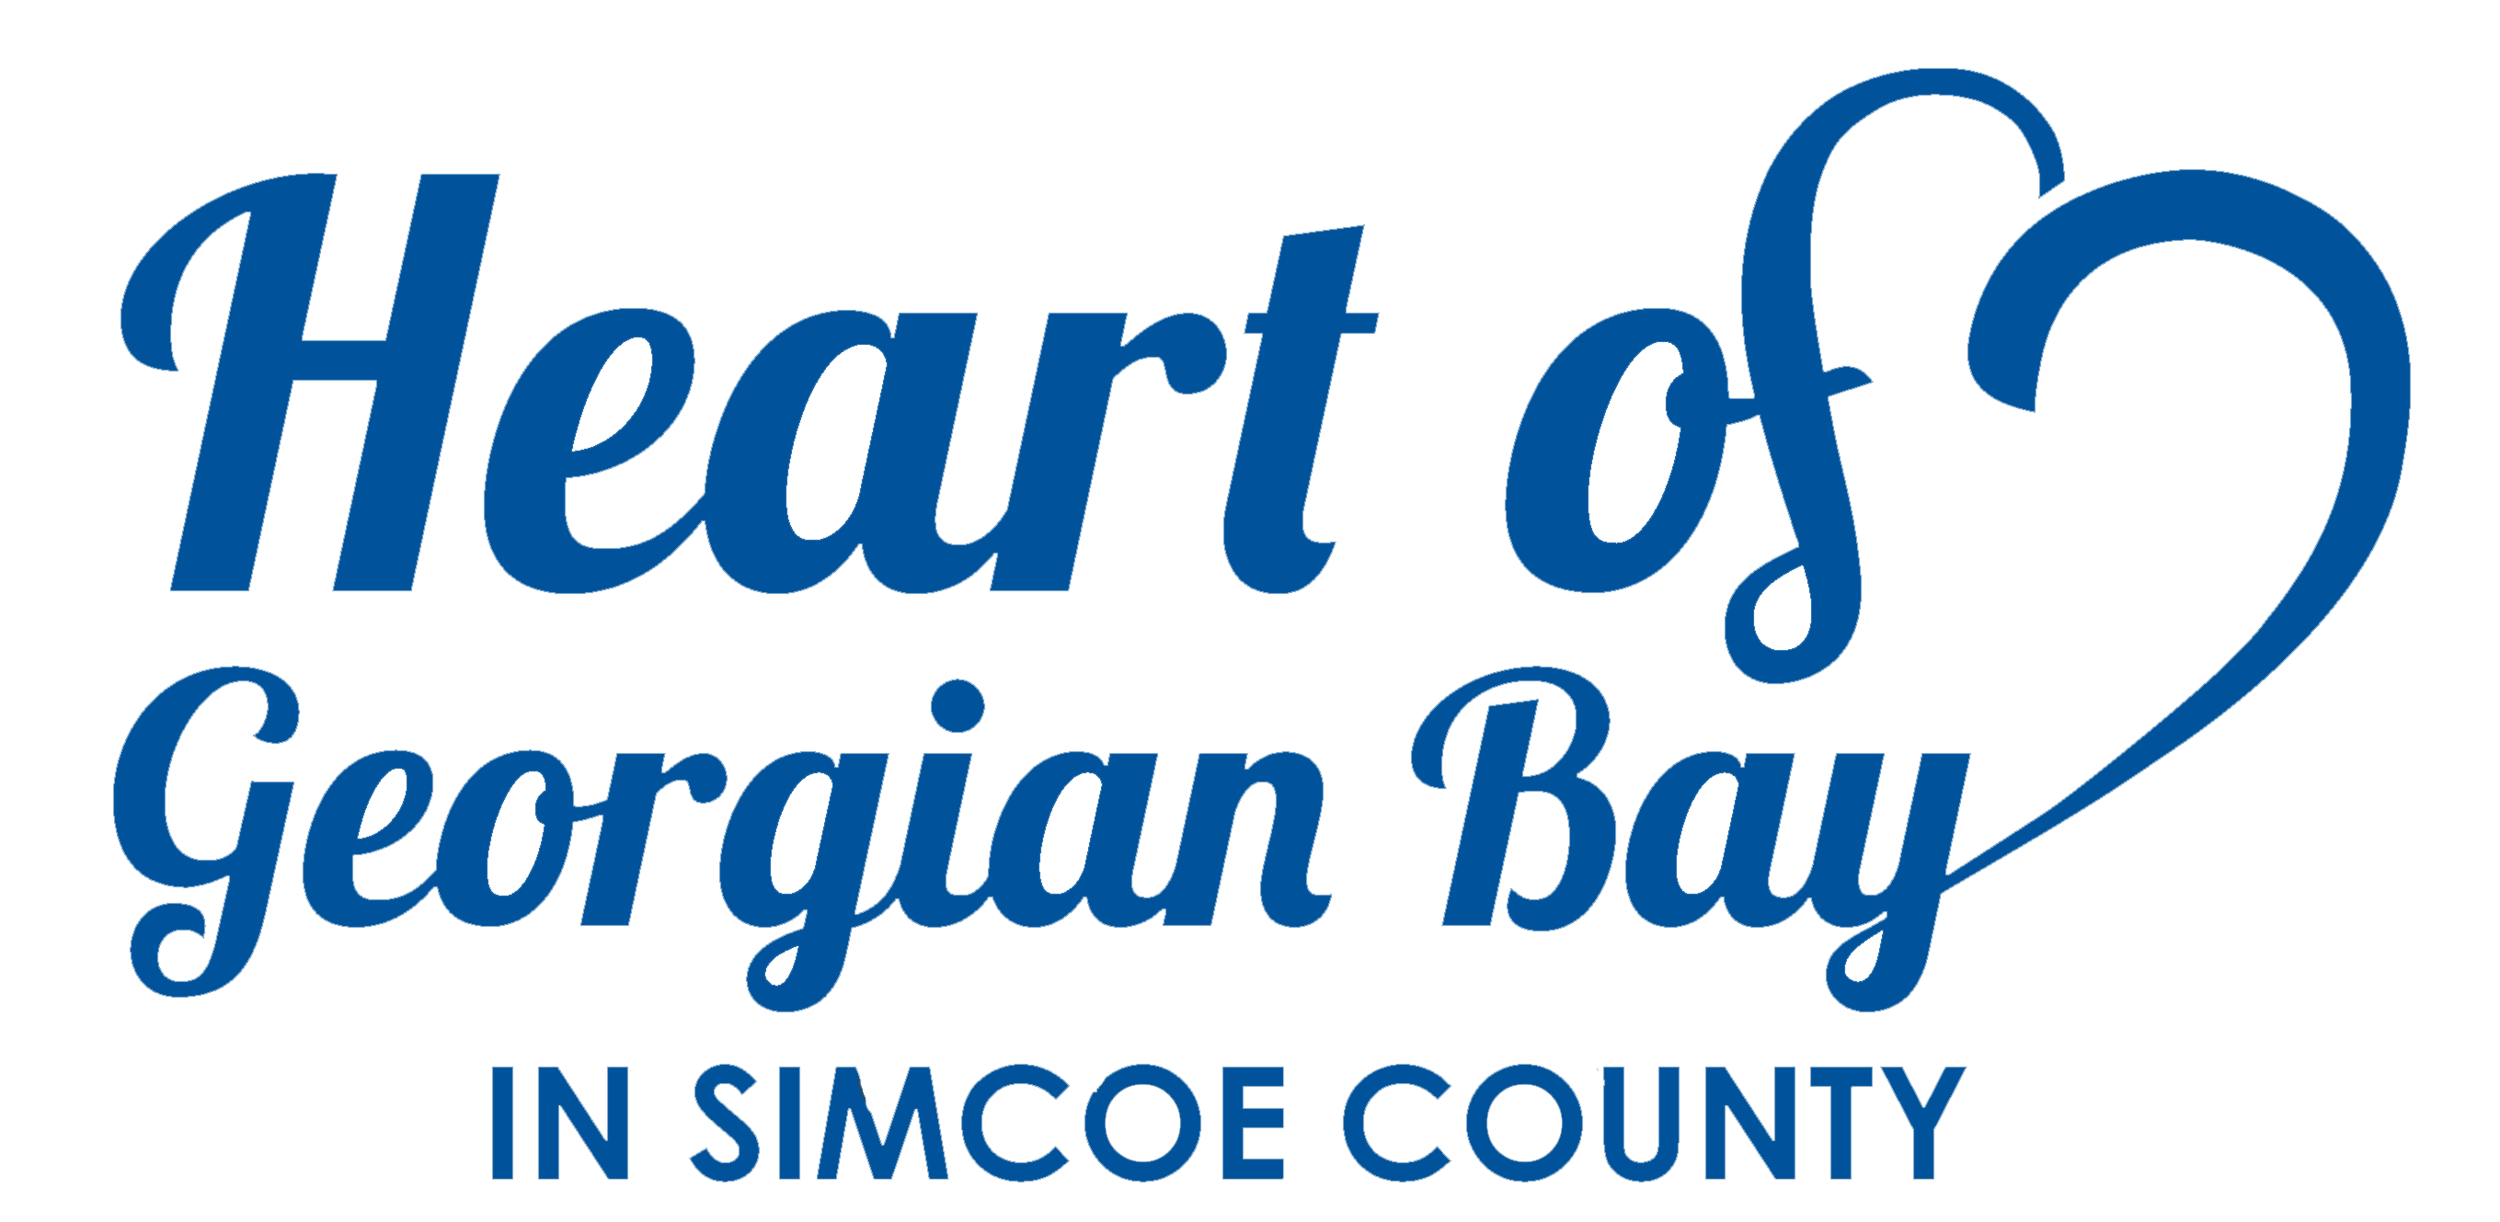 HeartofGBay_IN-SIMCOE-COUNTY.png